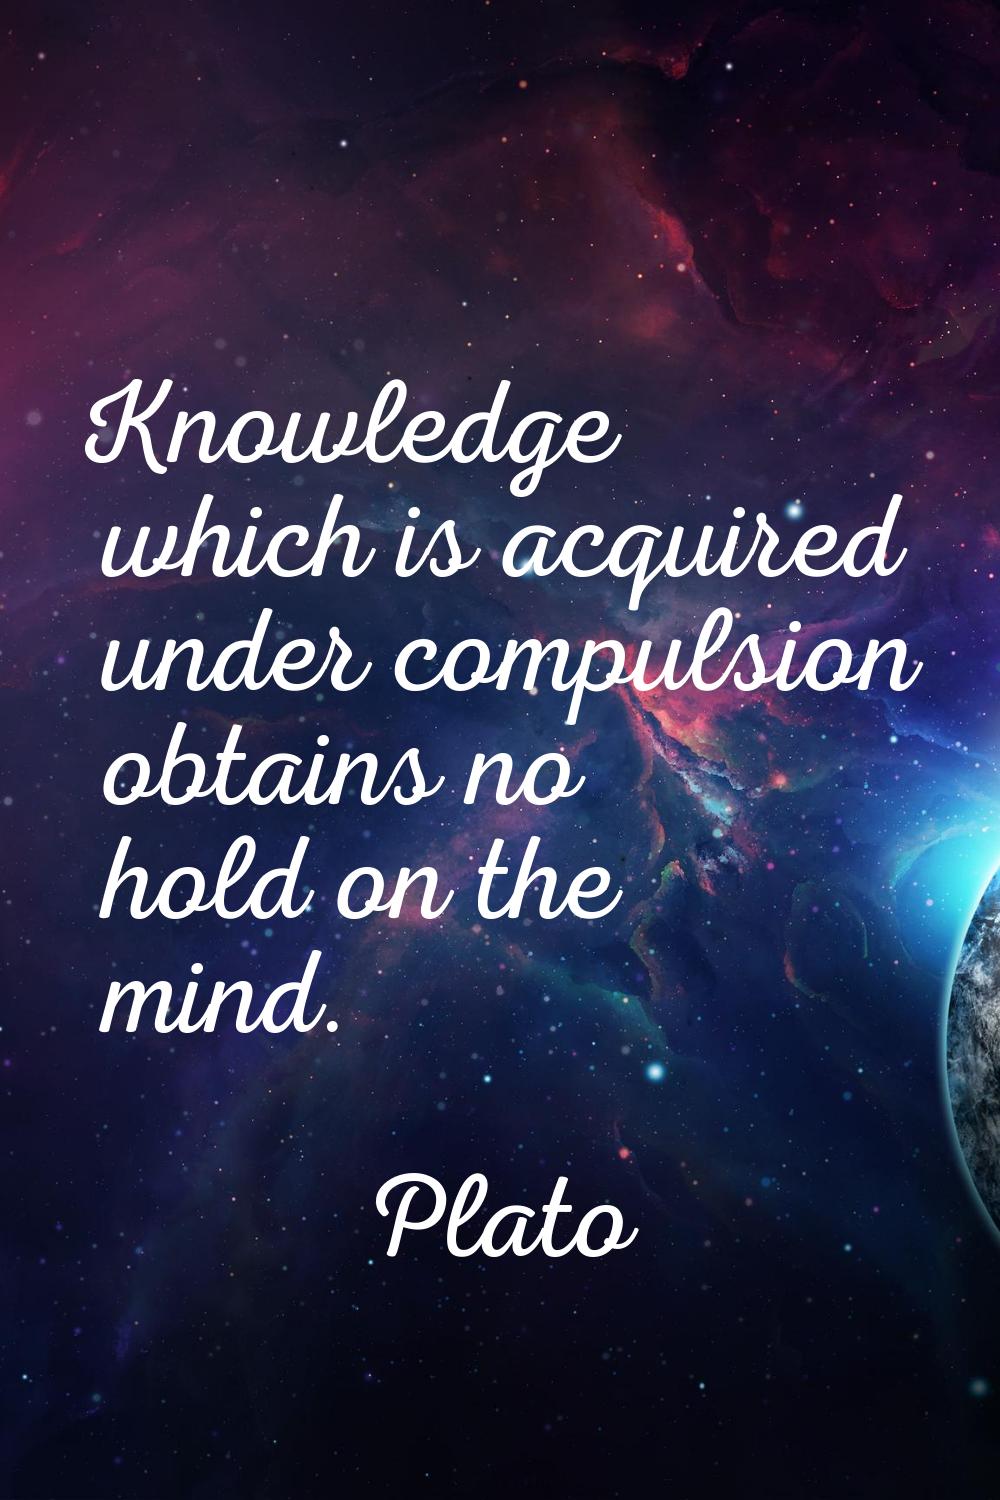 Knowledge which is acquired under compulsion obtains no hold on the mind.